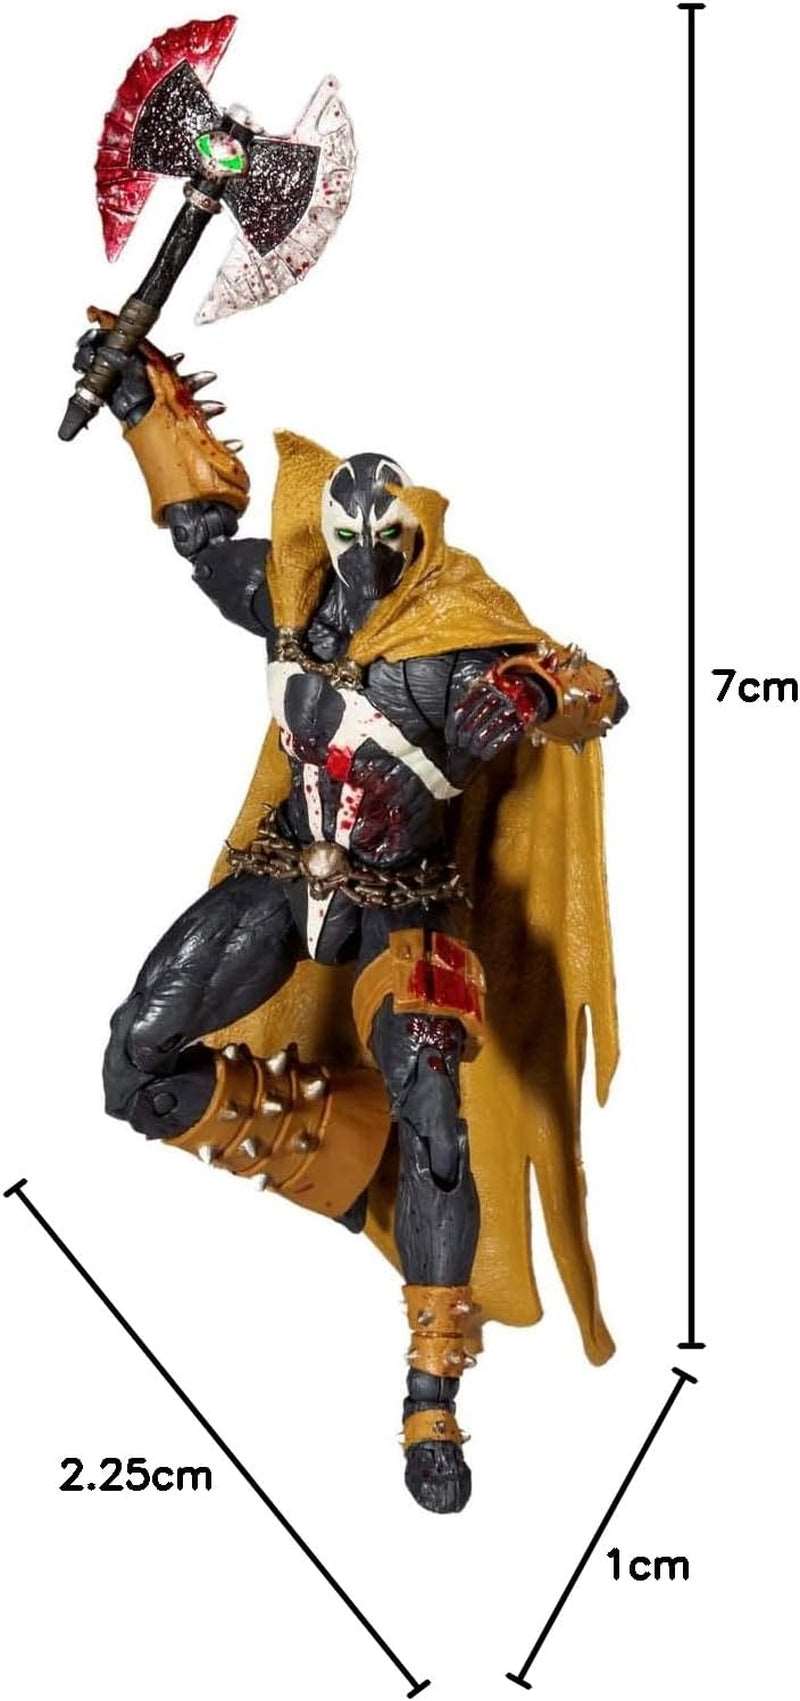 Mortal Kombat Spawn Bloody Classic 7" Action Figure with Accessories